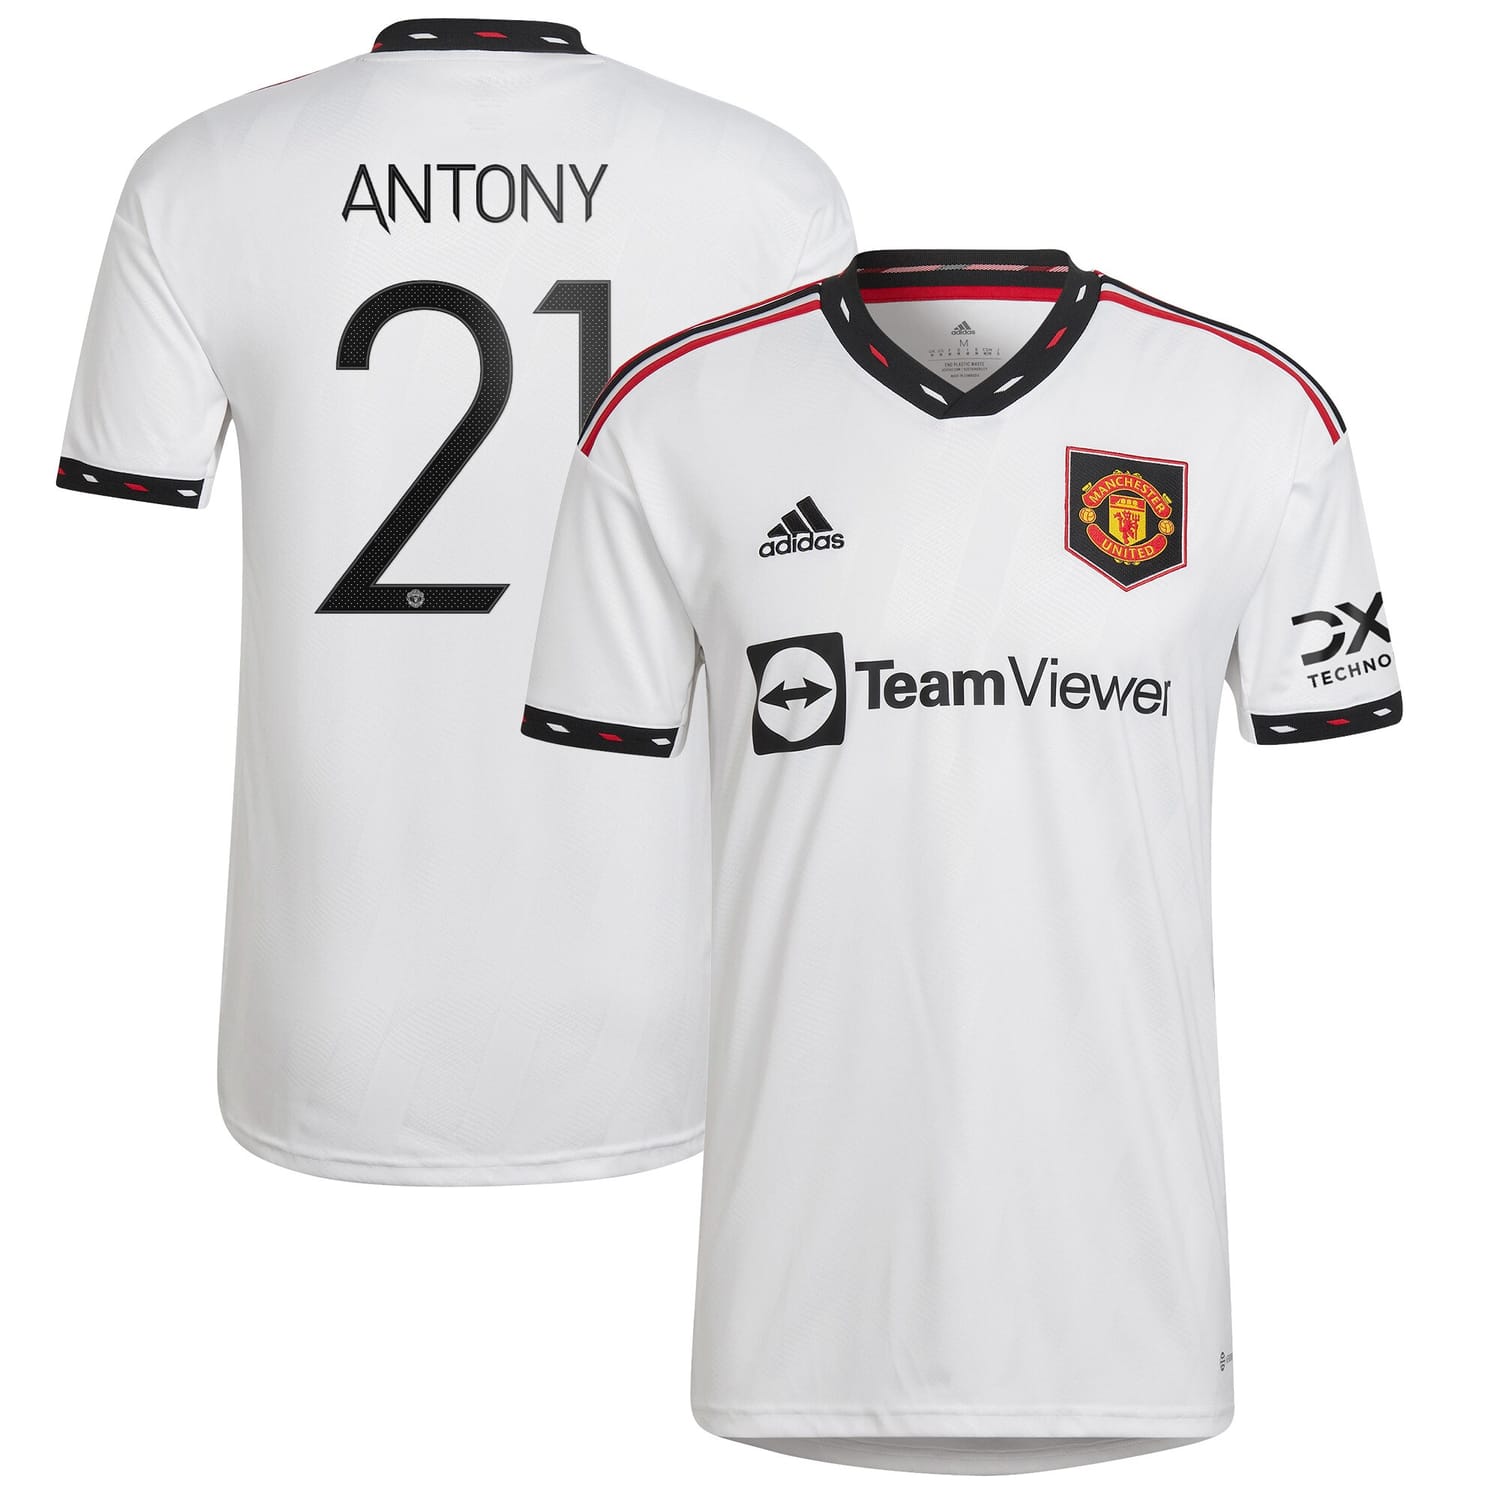 Premier League Manchester United Away Cup Jersey Shirt 2022-23 player Antony 21 printing for Men